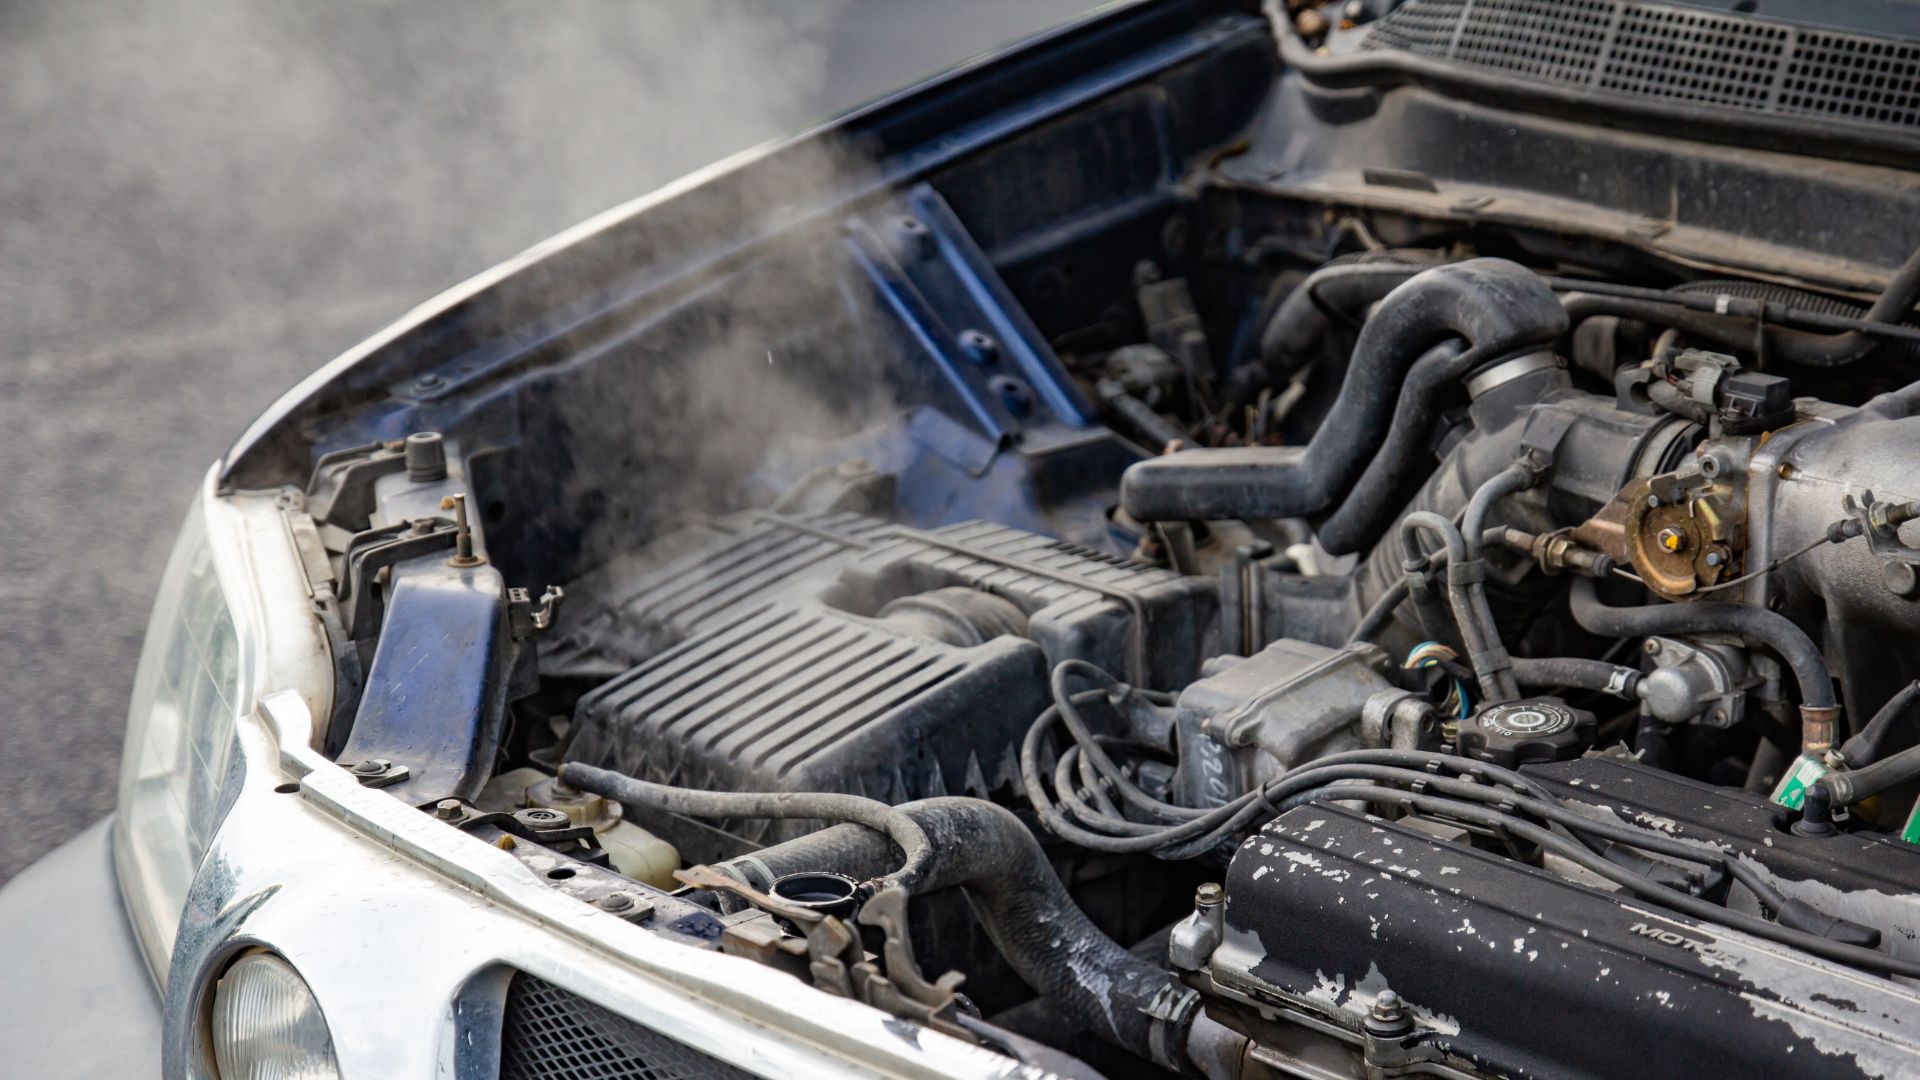 the engine compartment of a car with dust coming out of it.